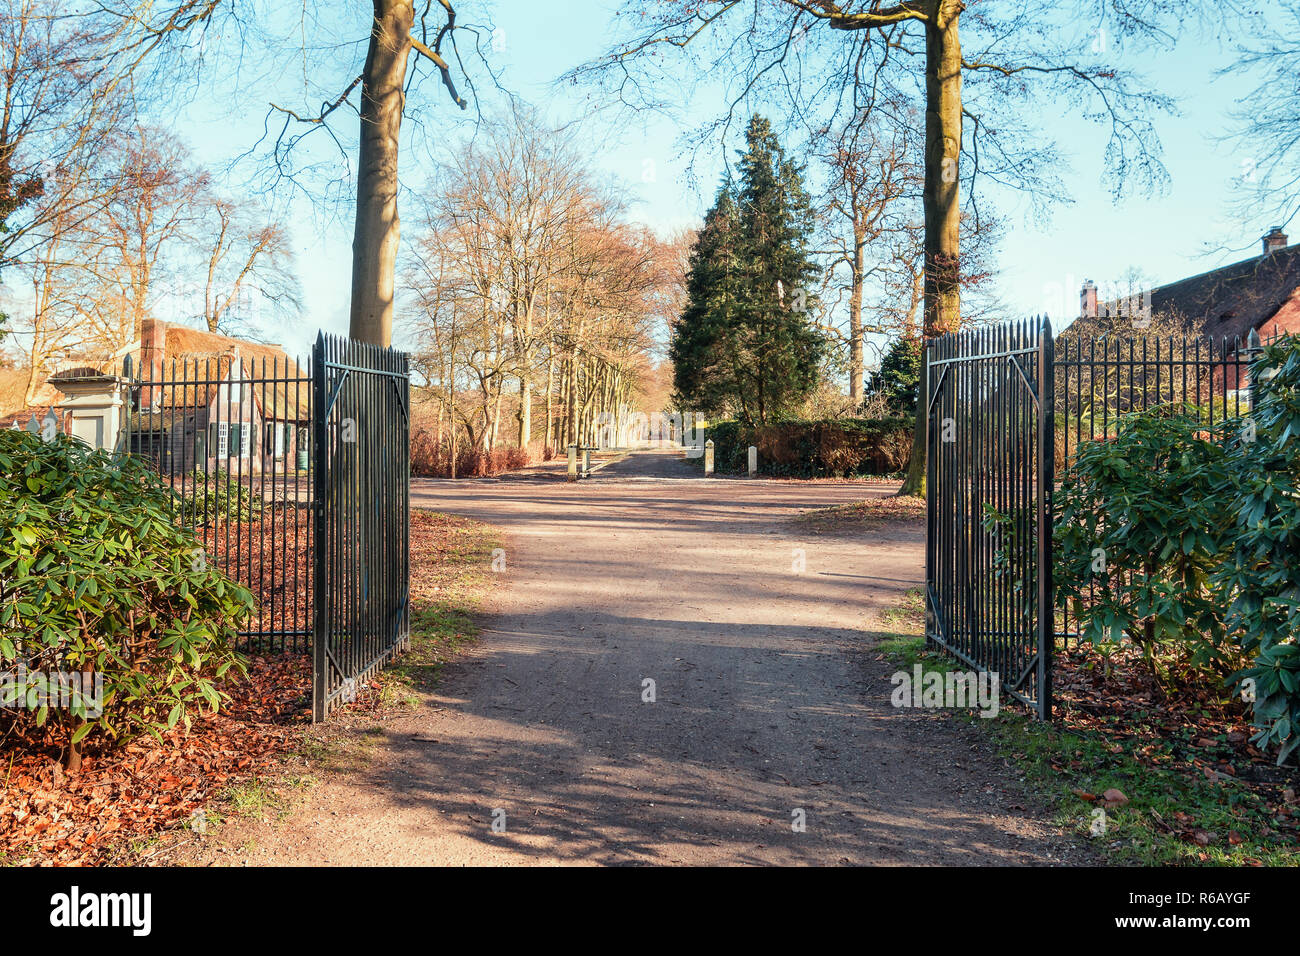 The back exit of the park of the estate Gooilust in 's-Graveland in The Netherlands Stock Photo